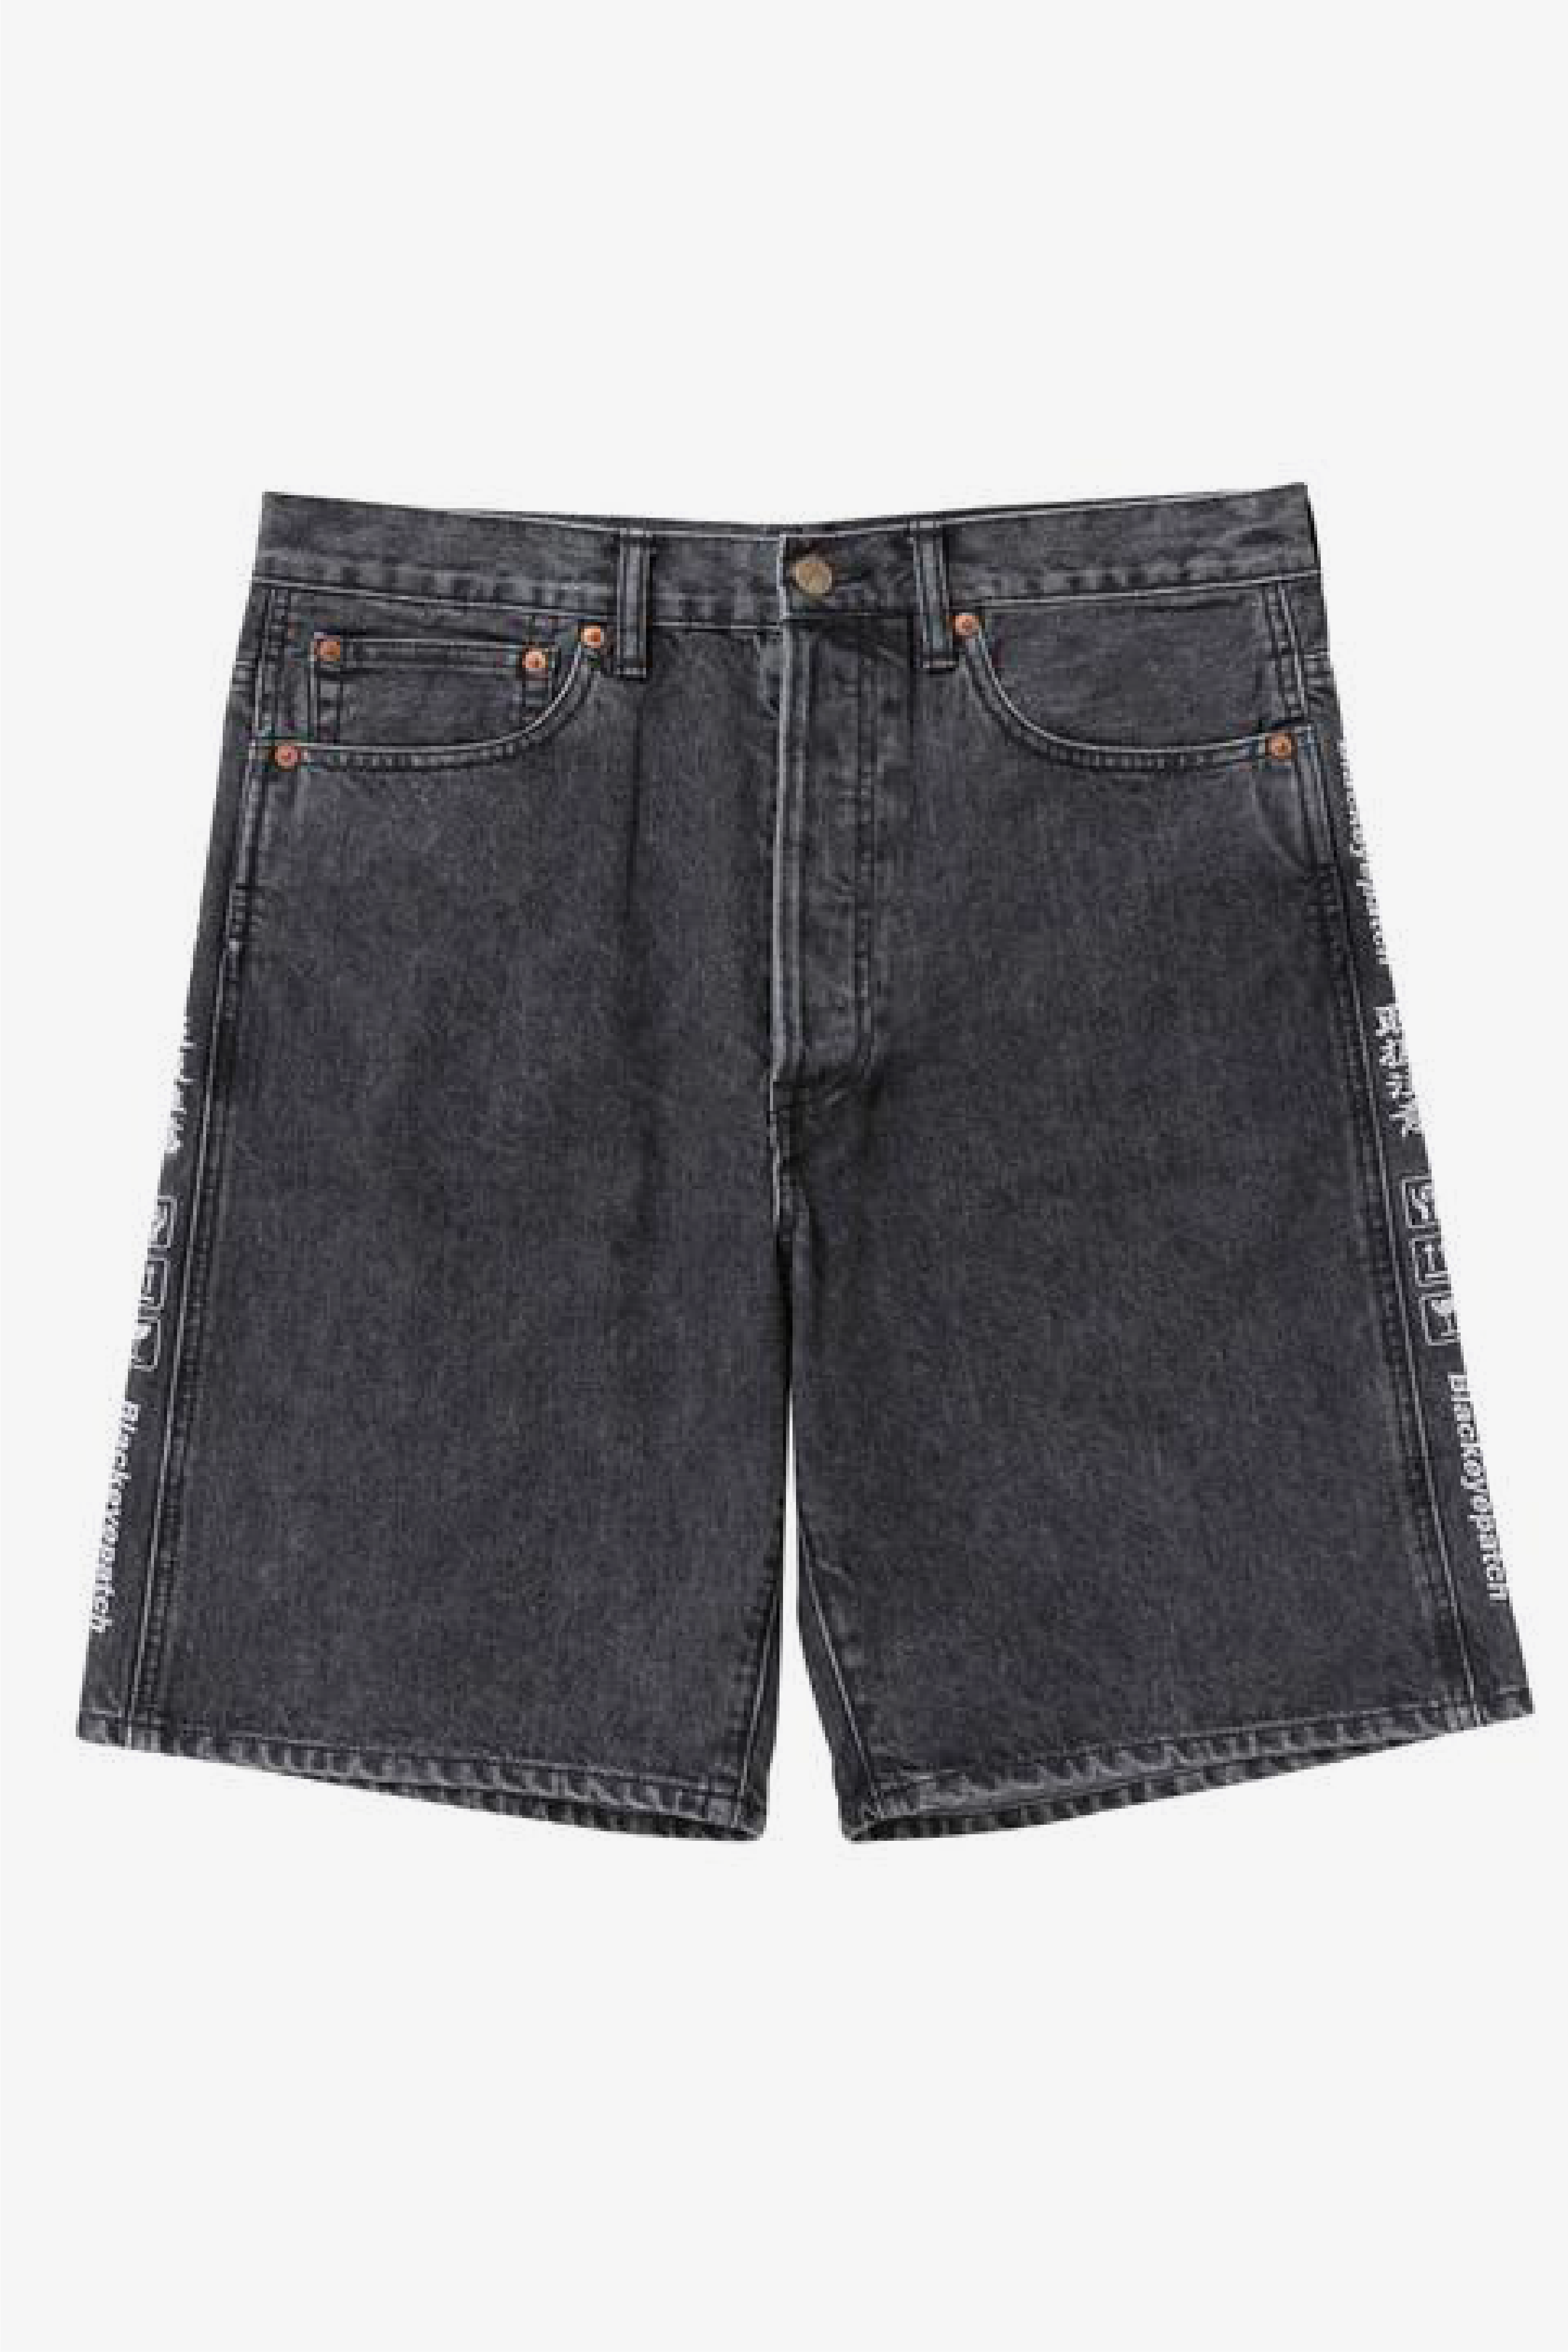 Handle With Care Denim Shorts